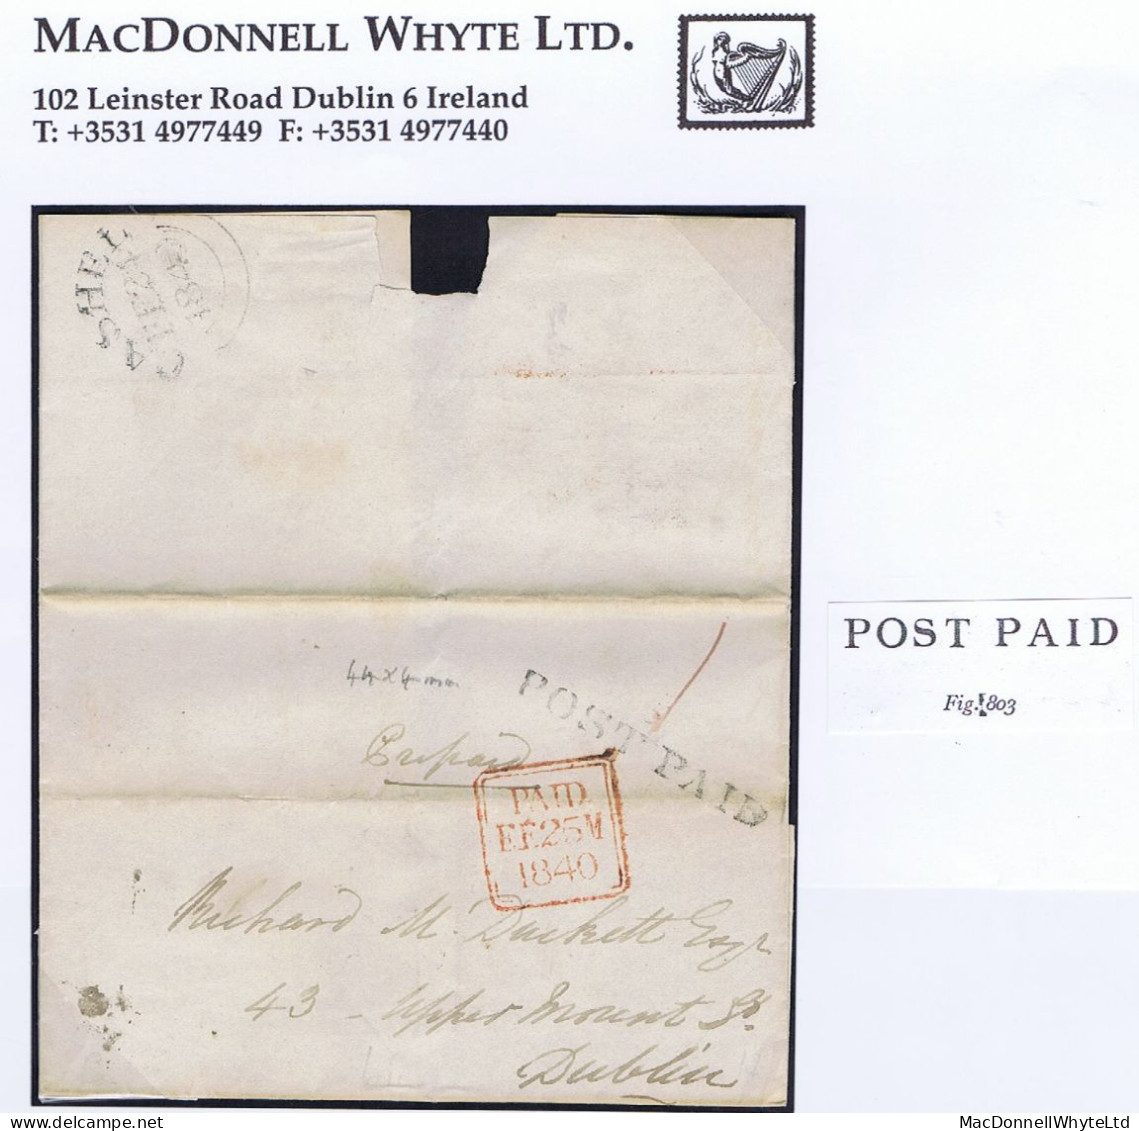 Ireland Tipperary Uniform Penny Post 1840 Cover To Dublin With Unframed POST PAID Of Cashel, CASHEL FE 24 1840 Cds - Voorfilatelie